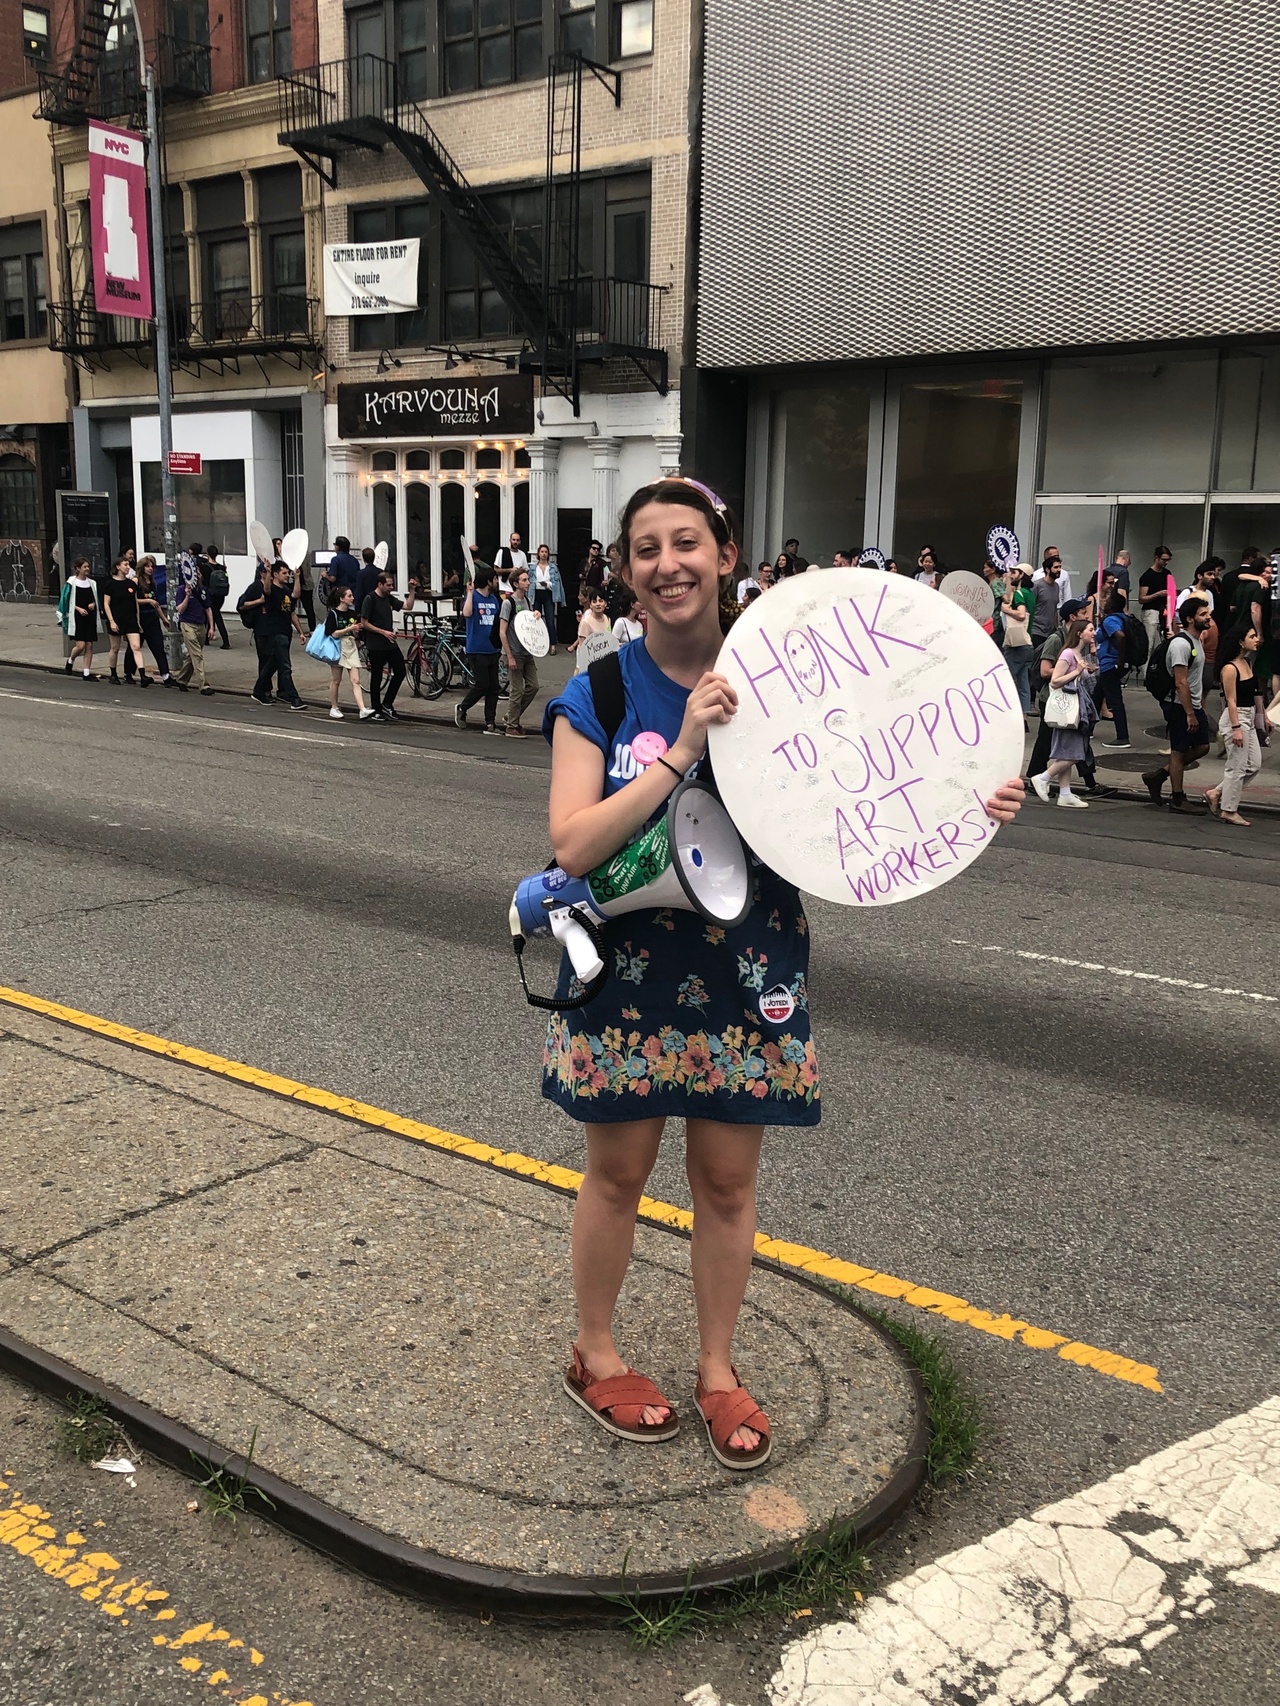 New Museum Union workers and supporters rally outside the New Museum, June 25, 2019